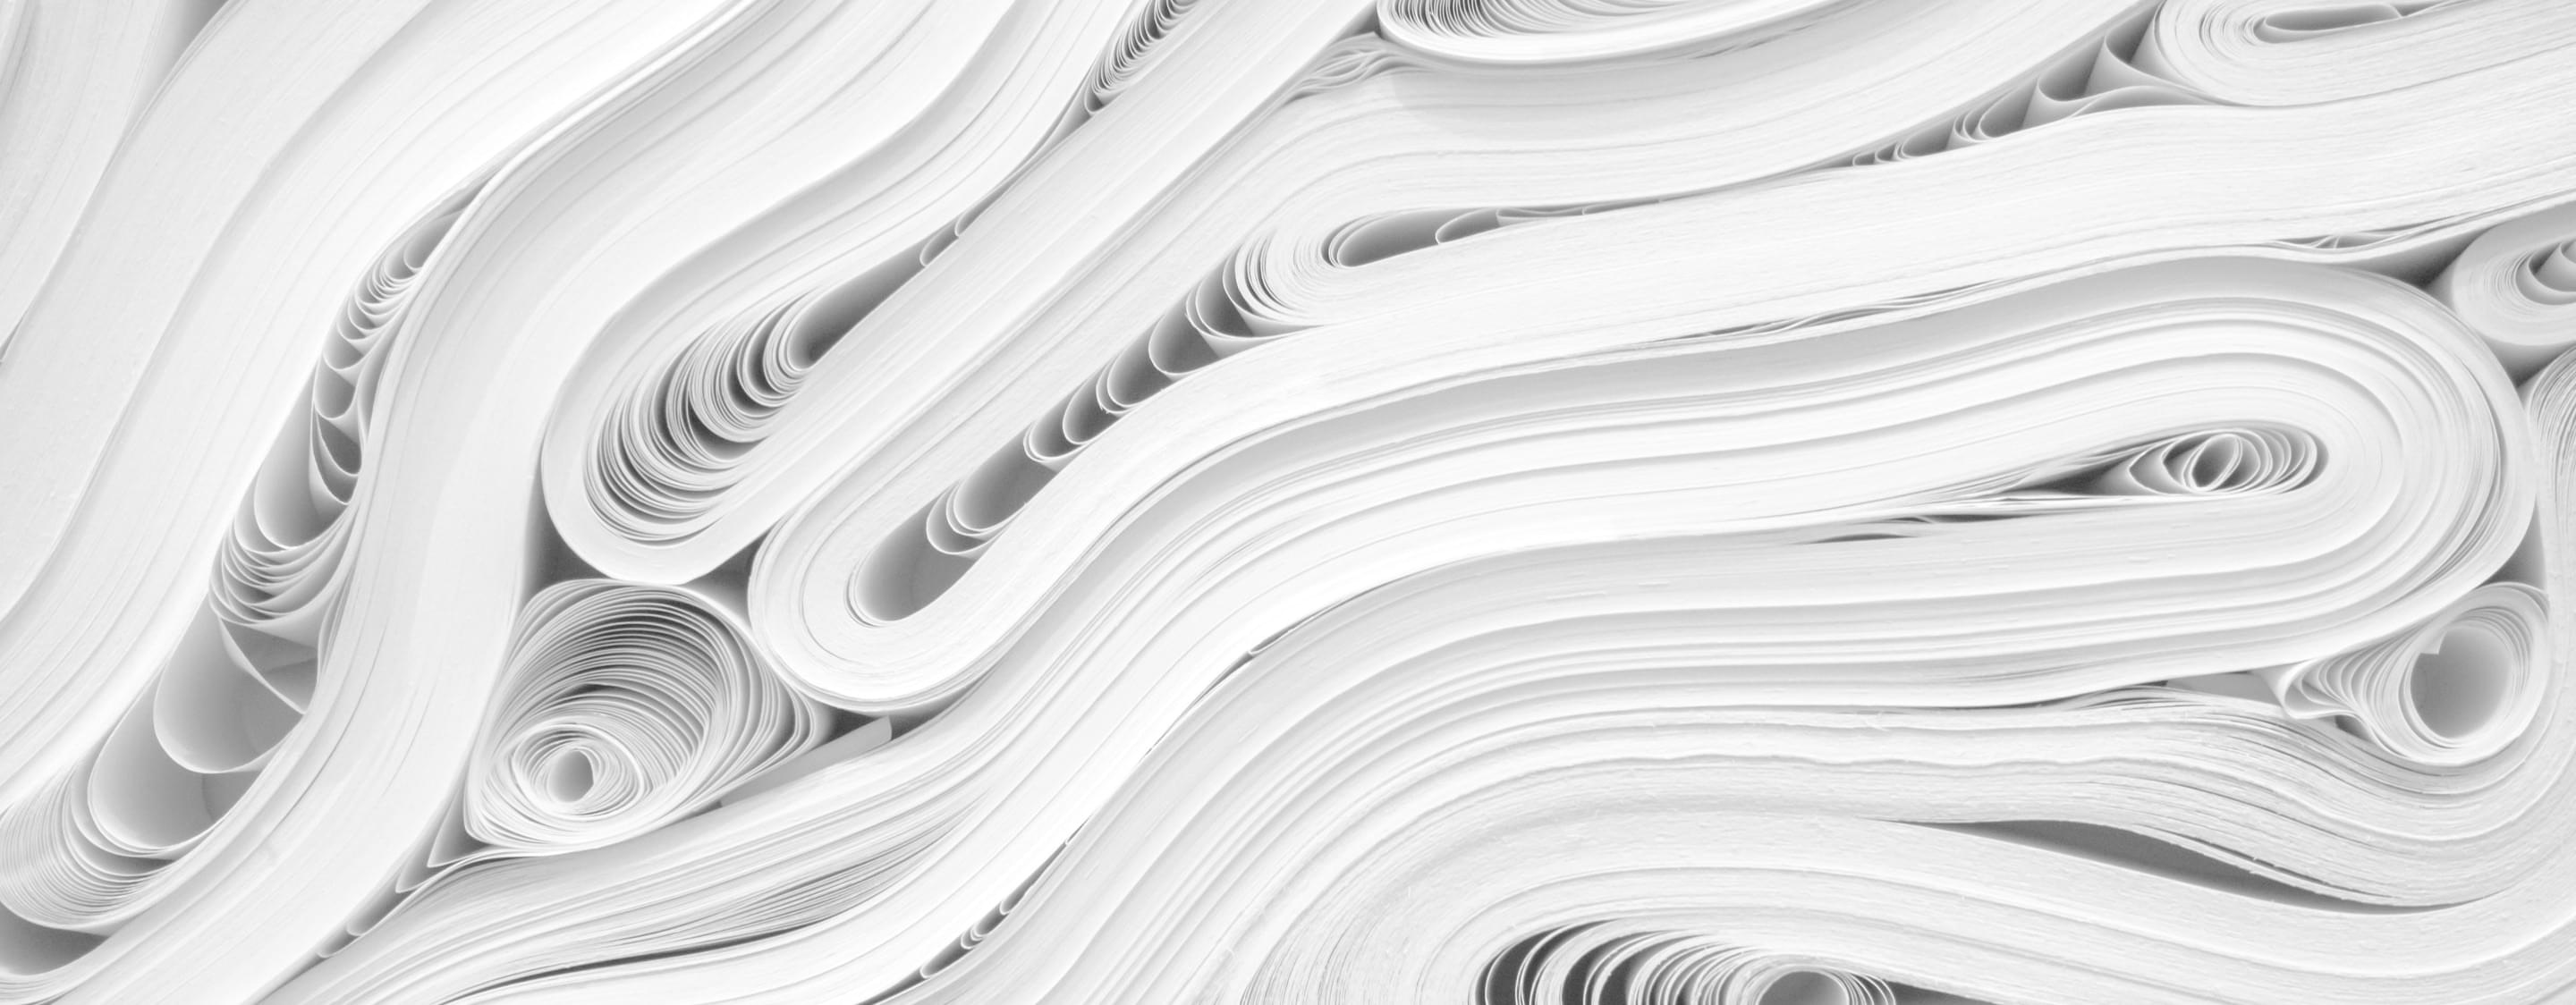 Abstract image of paper